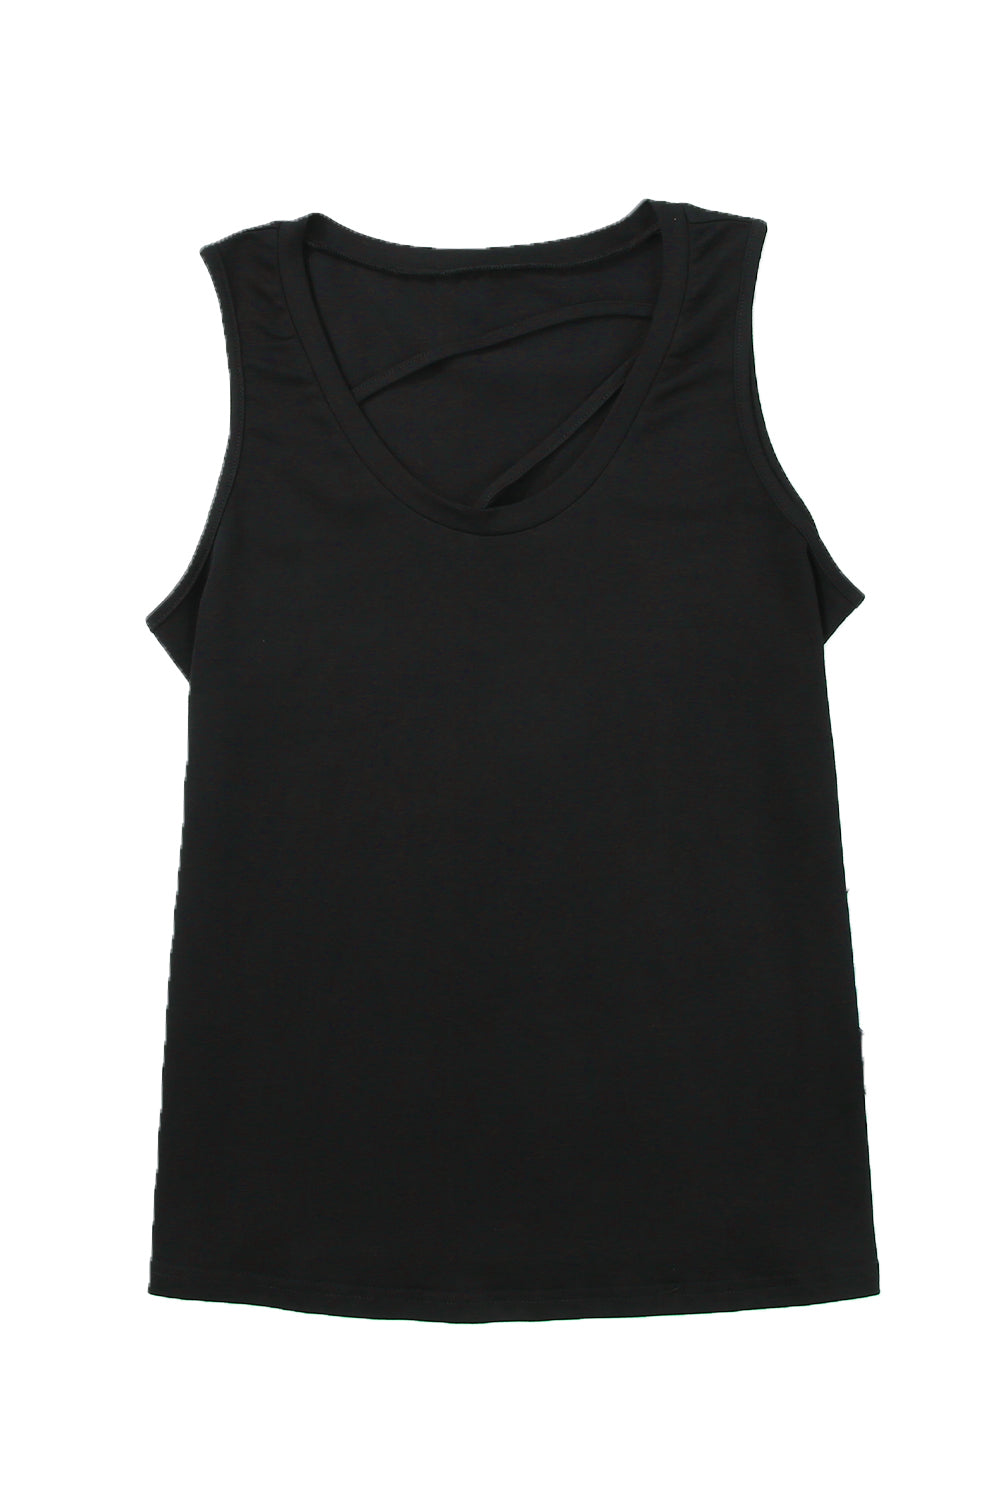 Black Strappy Hollow-out Neck Tank Top Tank Tops JT's Designer Fashion